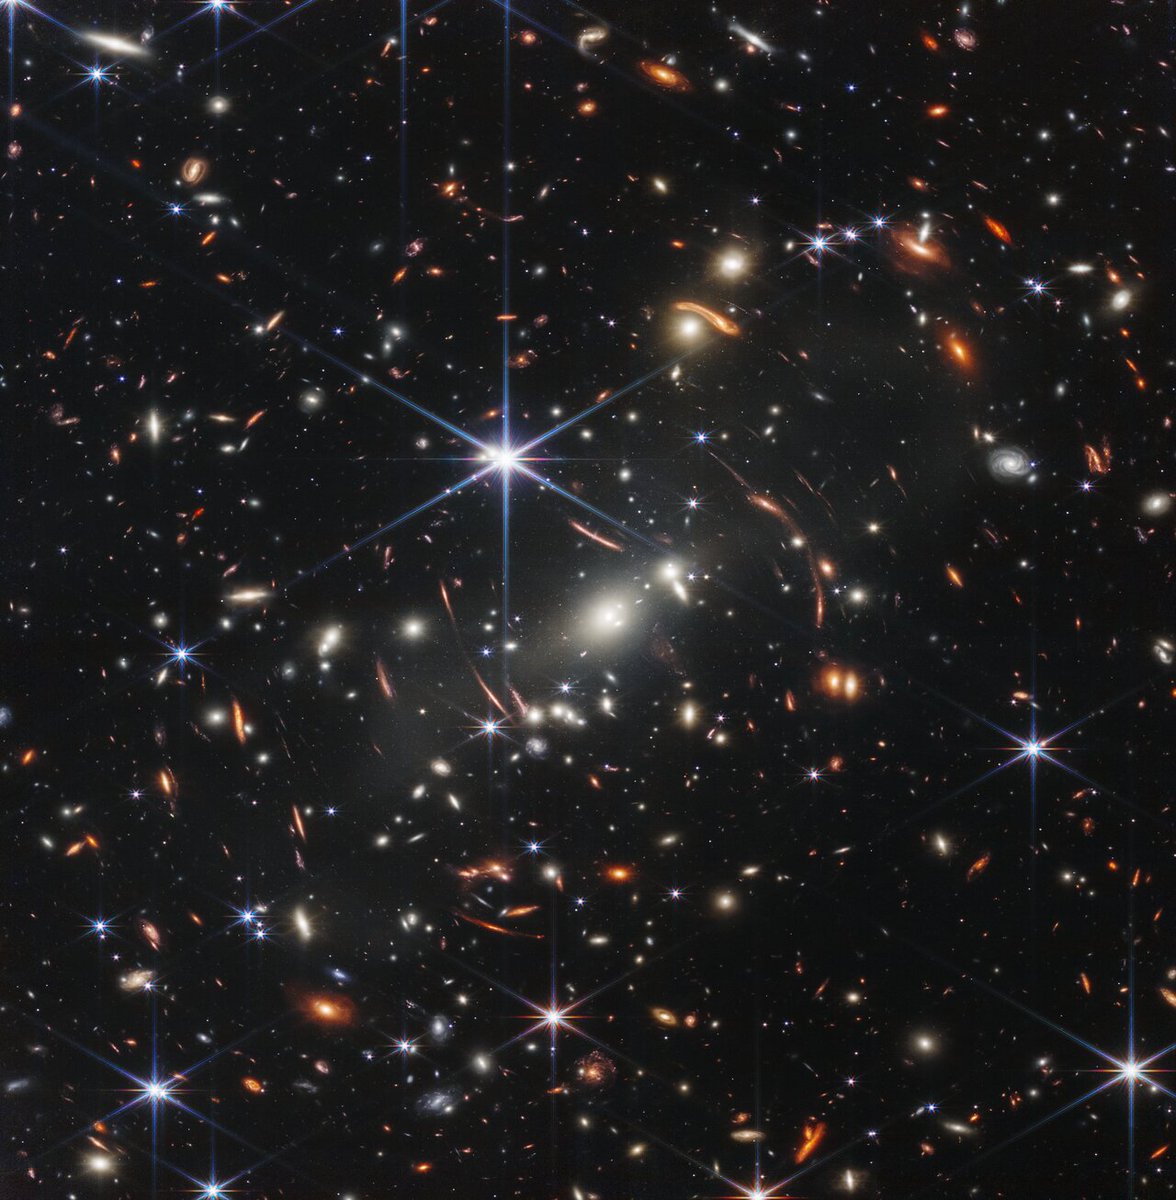 📢 The moment we have been waiting for is here. #Webb delivers deepest infrared image of Universe yet in special briefing. Known as Webb’s First Deep Field, this image features the galaxy cluster SMACS 0723, which is overflowing with detail esawebb.org/announcements/… 👇